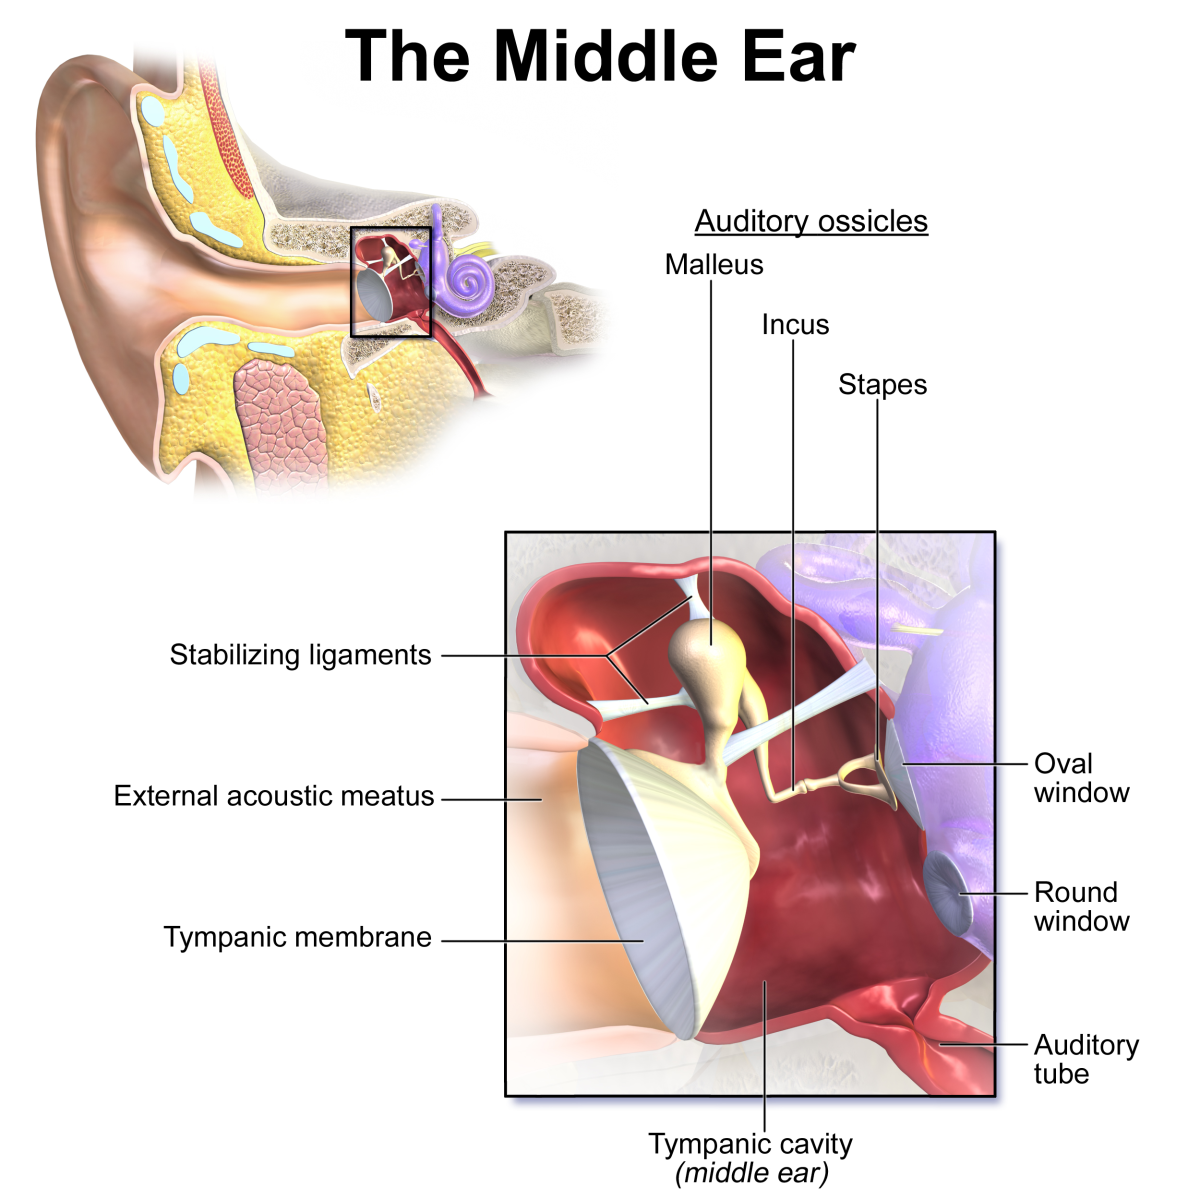 Anatomy of the middle ear